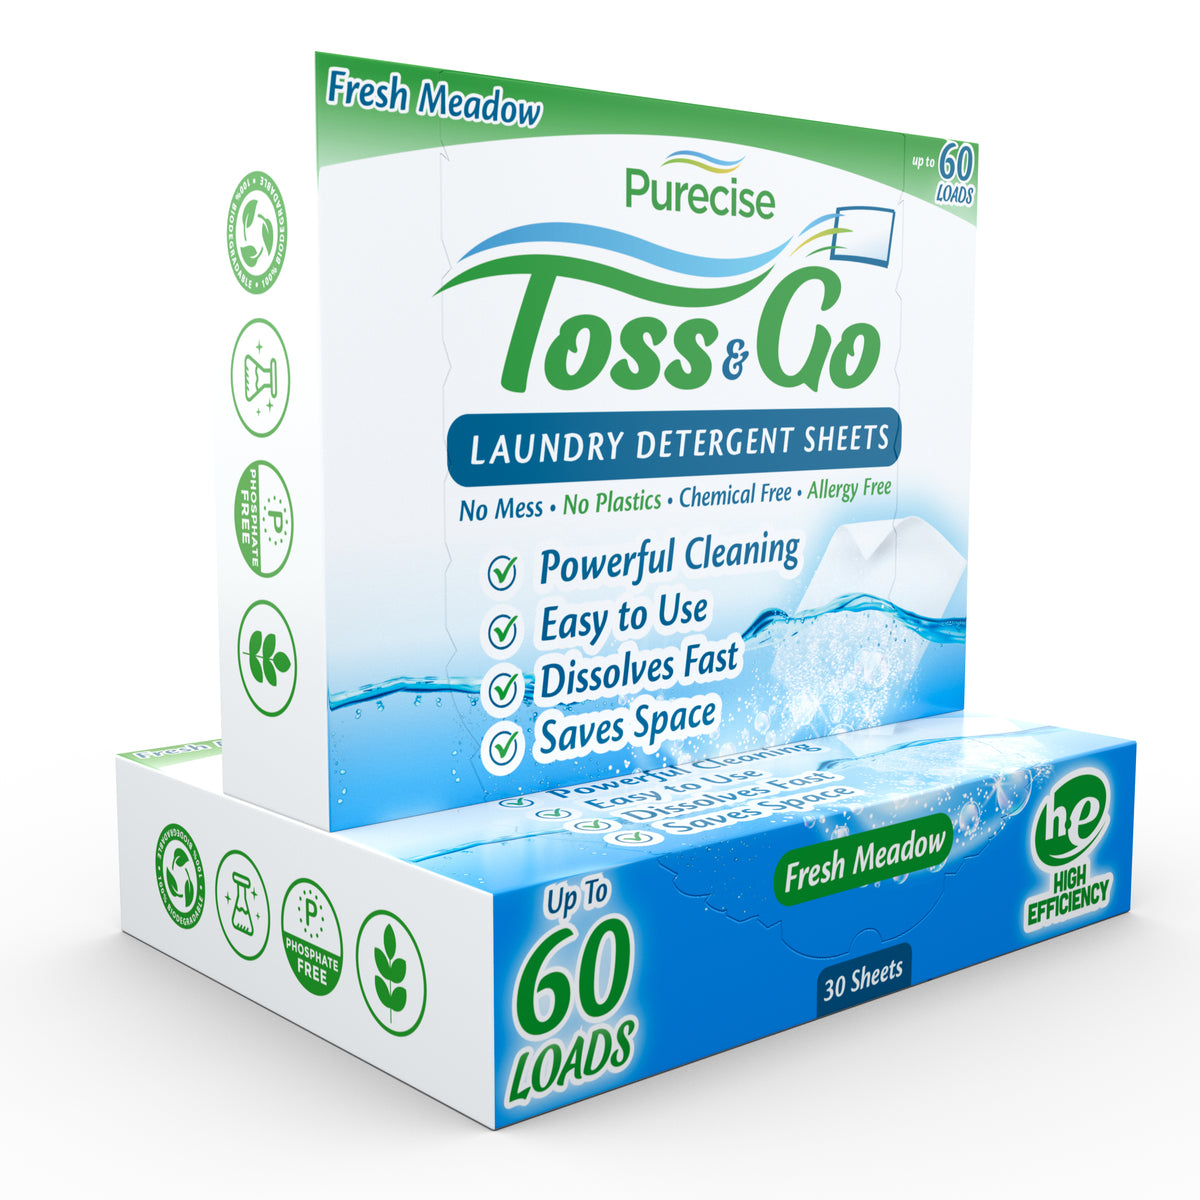 Toss &amp; Go Laundry Detergent Sheets by Purecise